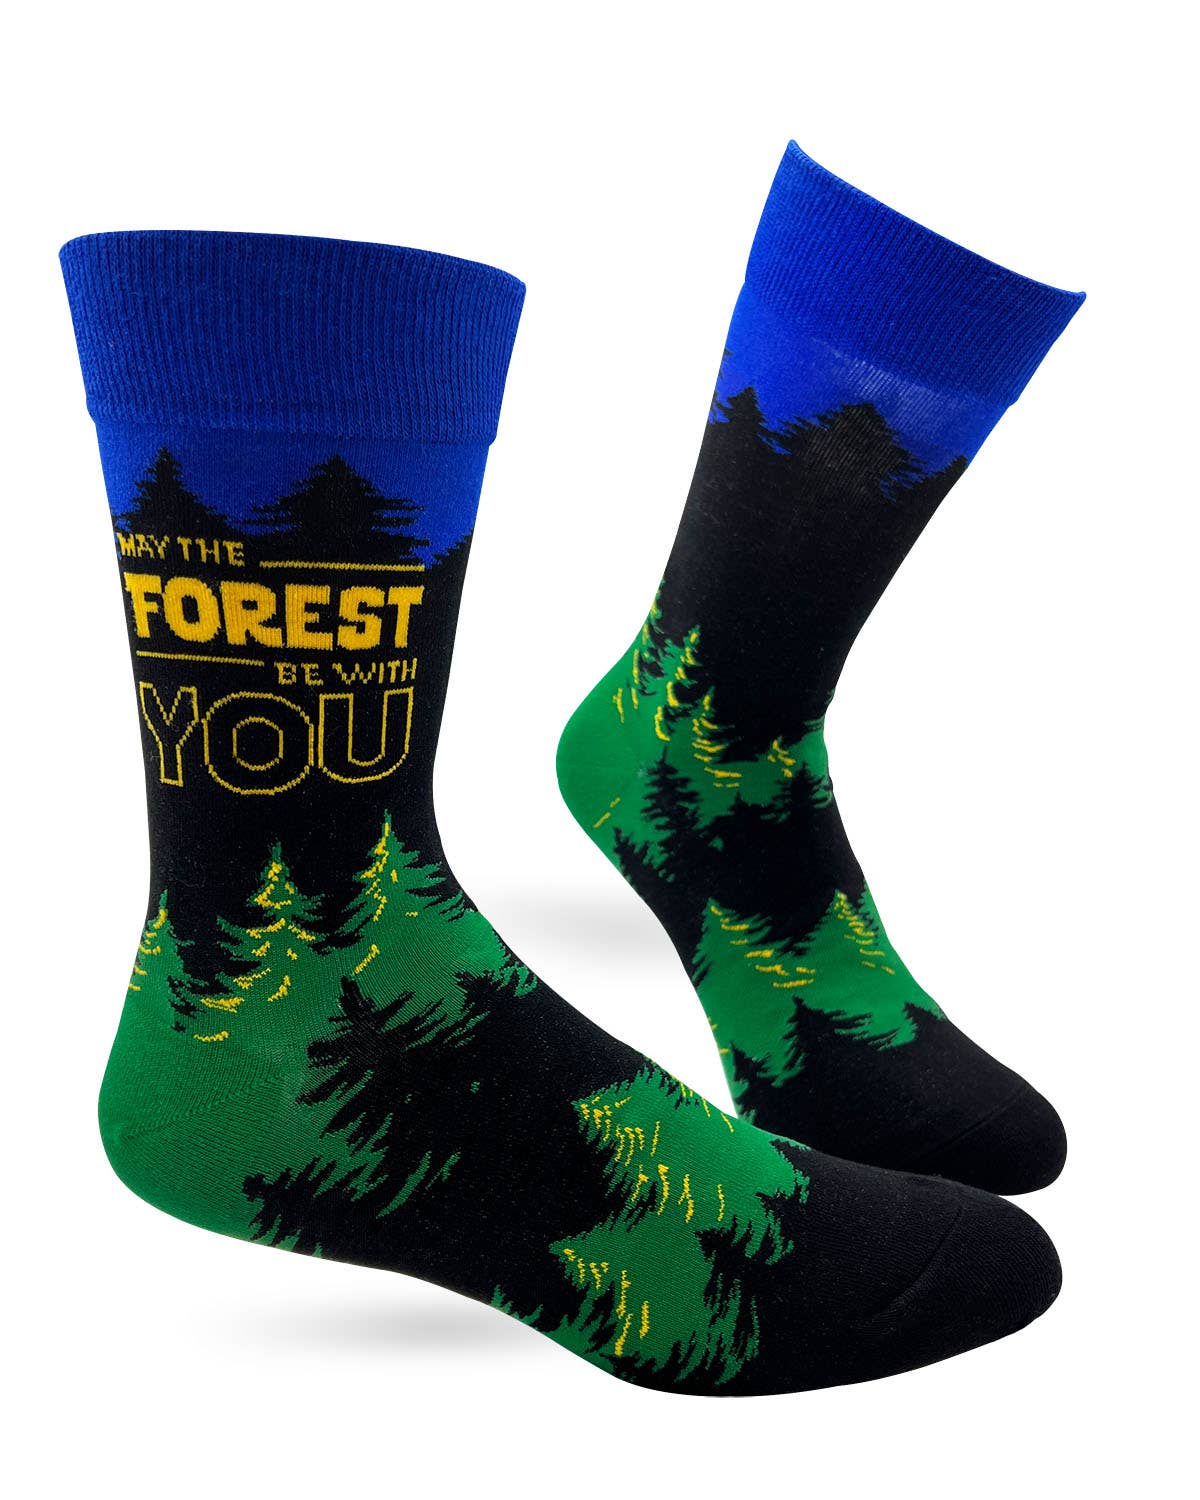 May The Forest Be With You Men's Crew Socks